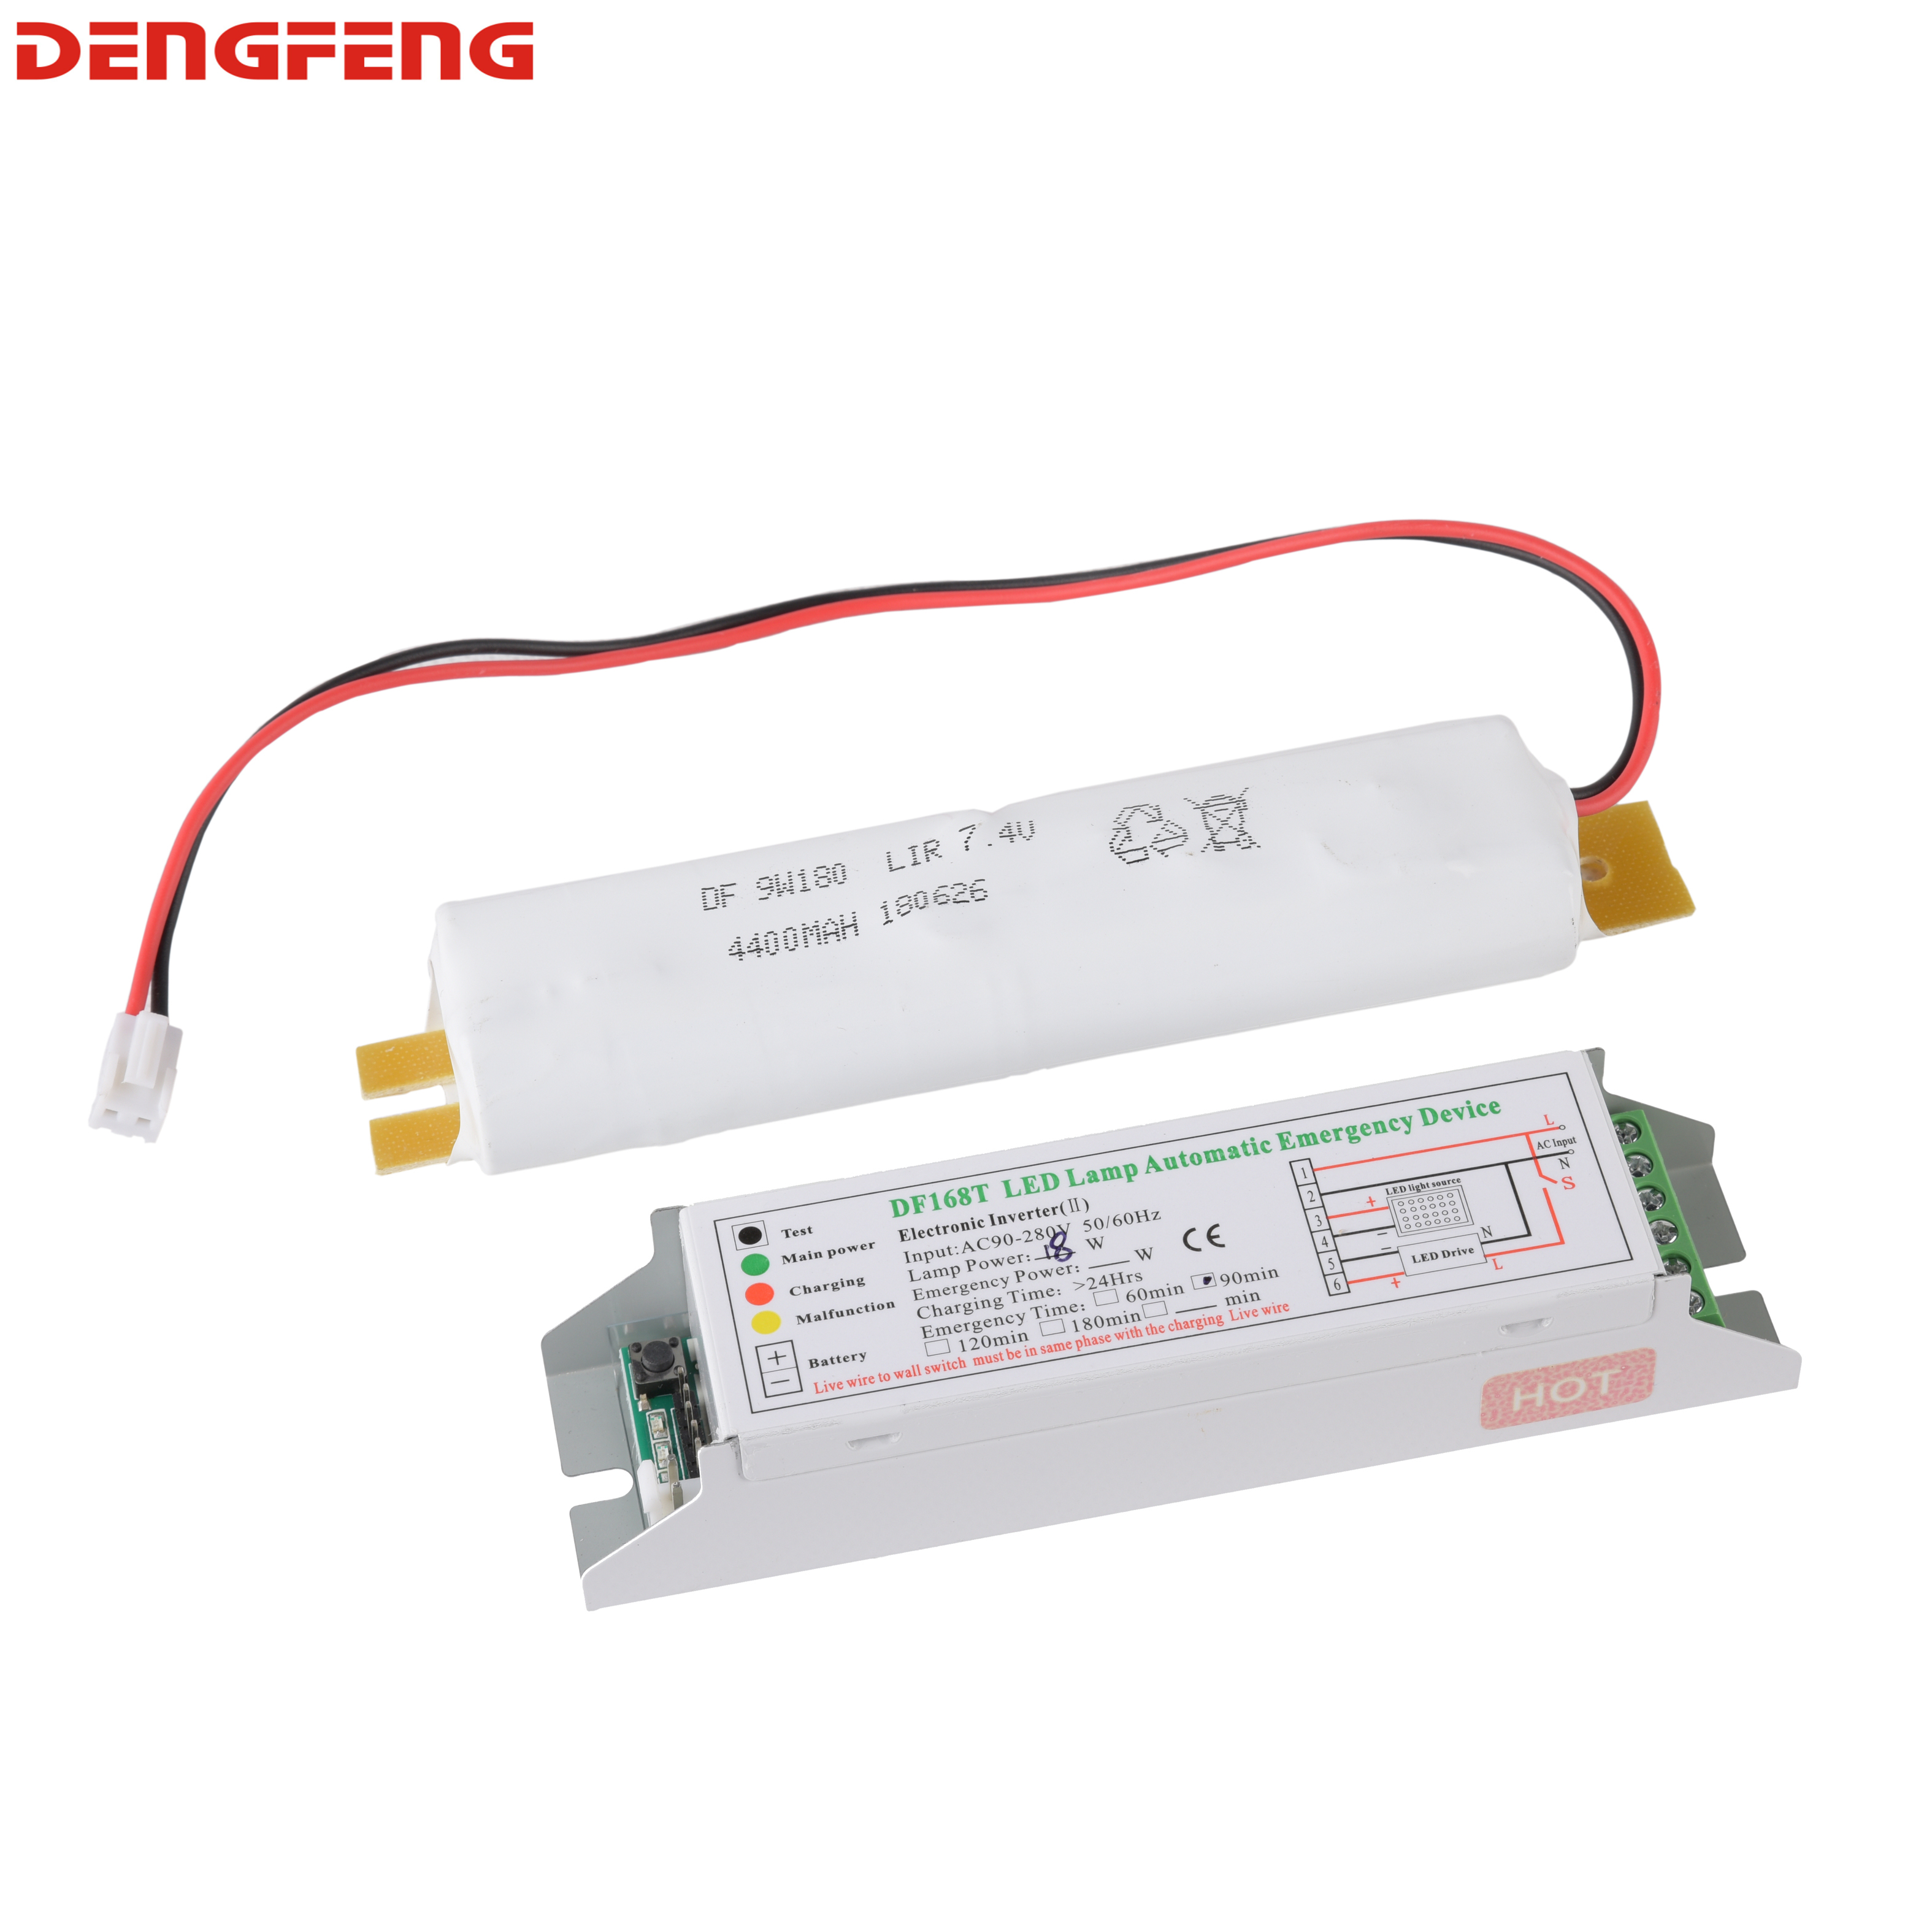 Rechargeable LED Emergency Power Supply DF168T 3h 5w fire emergency power